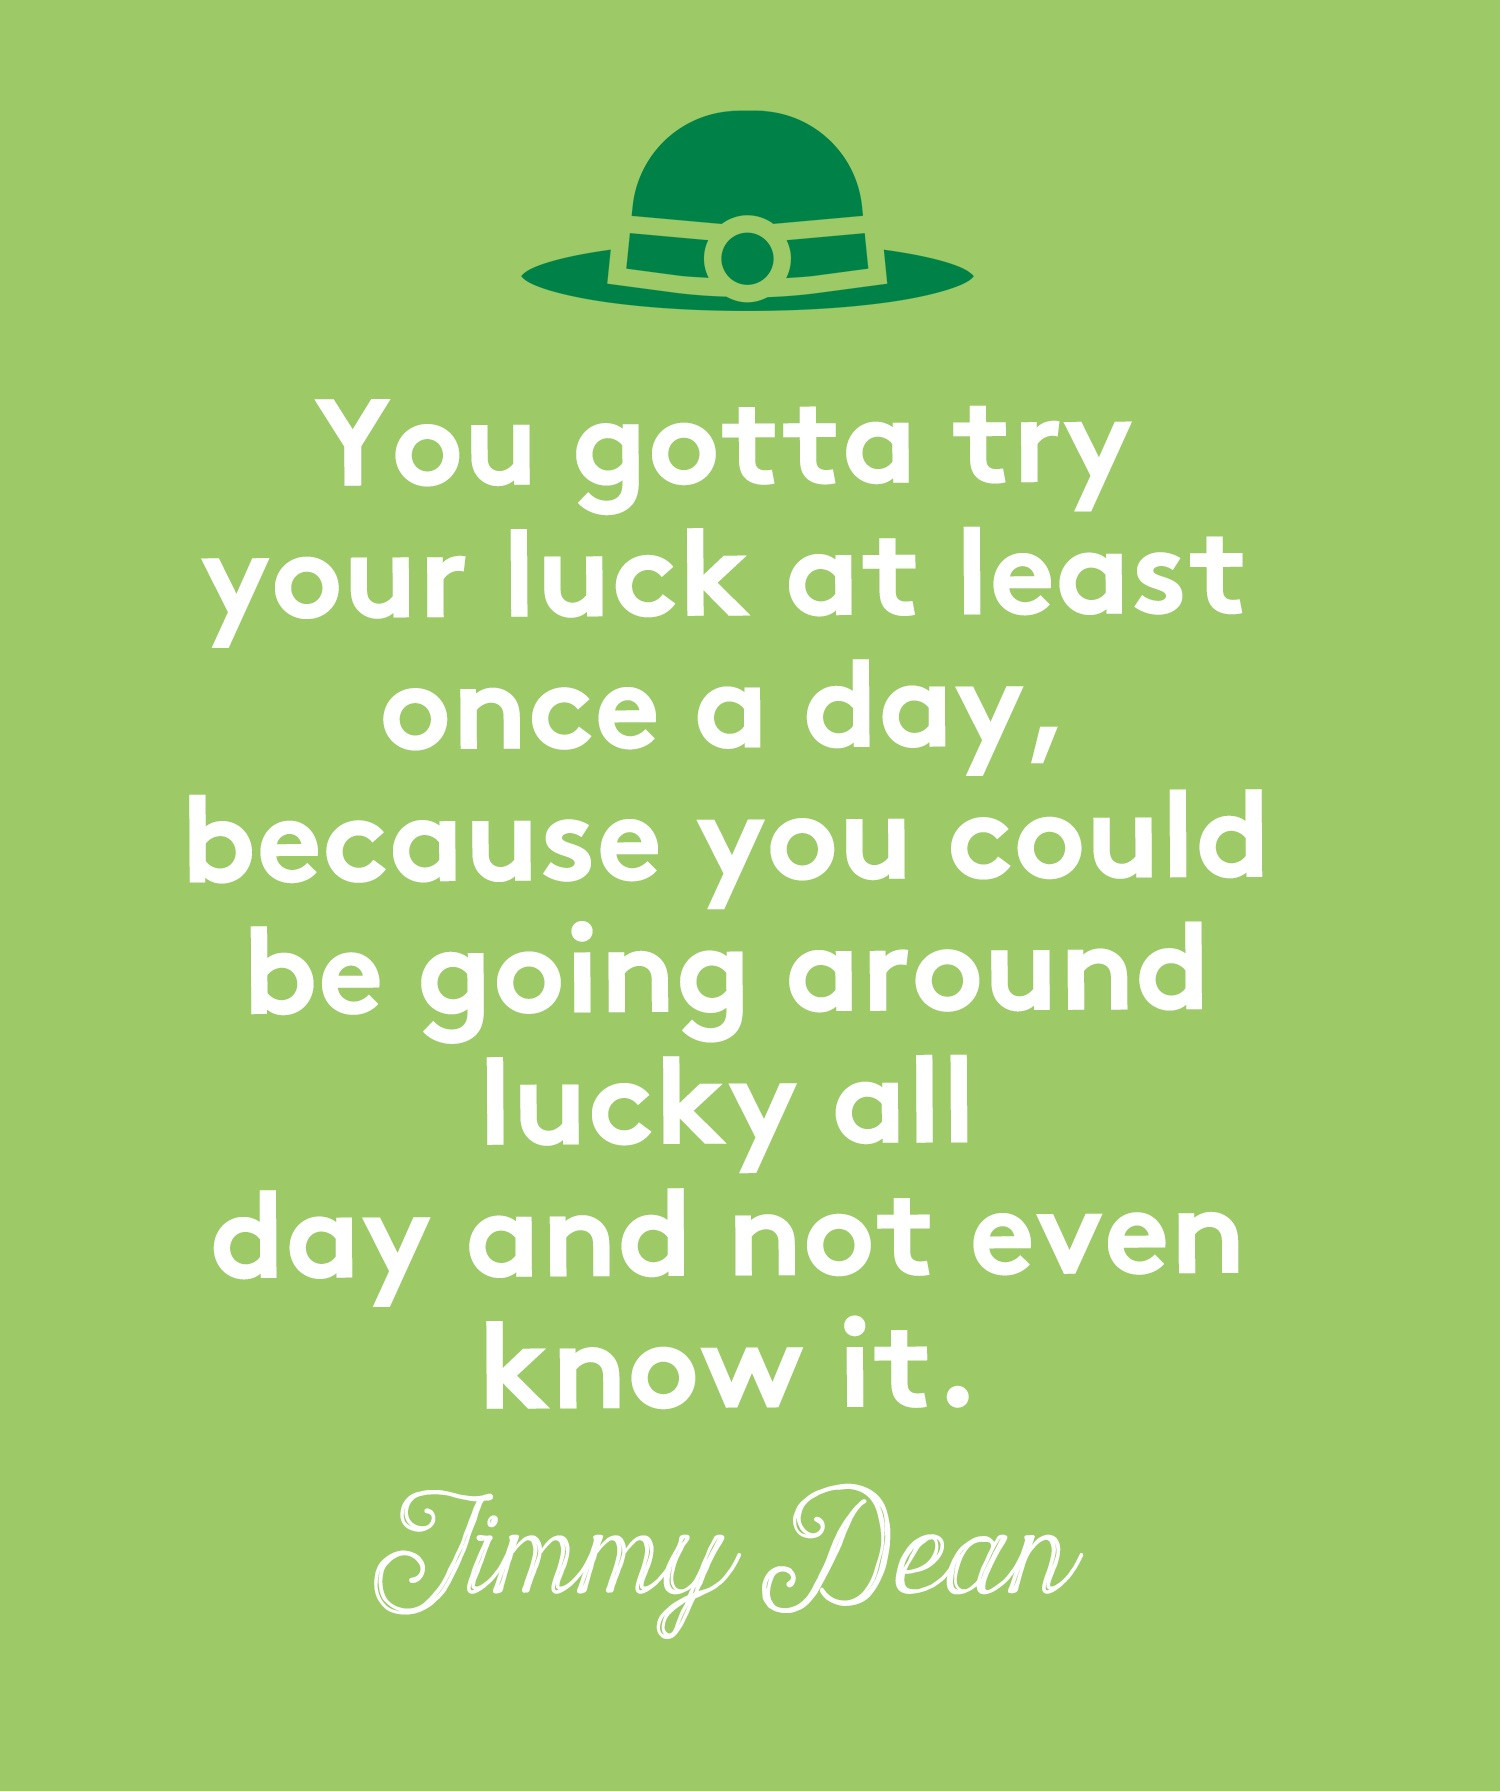 St Patrick's Day Love Quotes
 9 St Patrick’s Day Memes and Quotes You’ll Send to